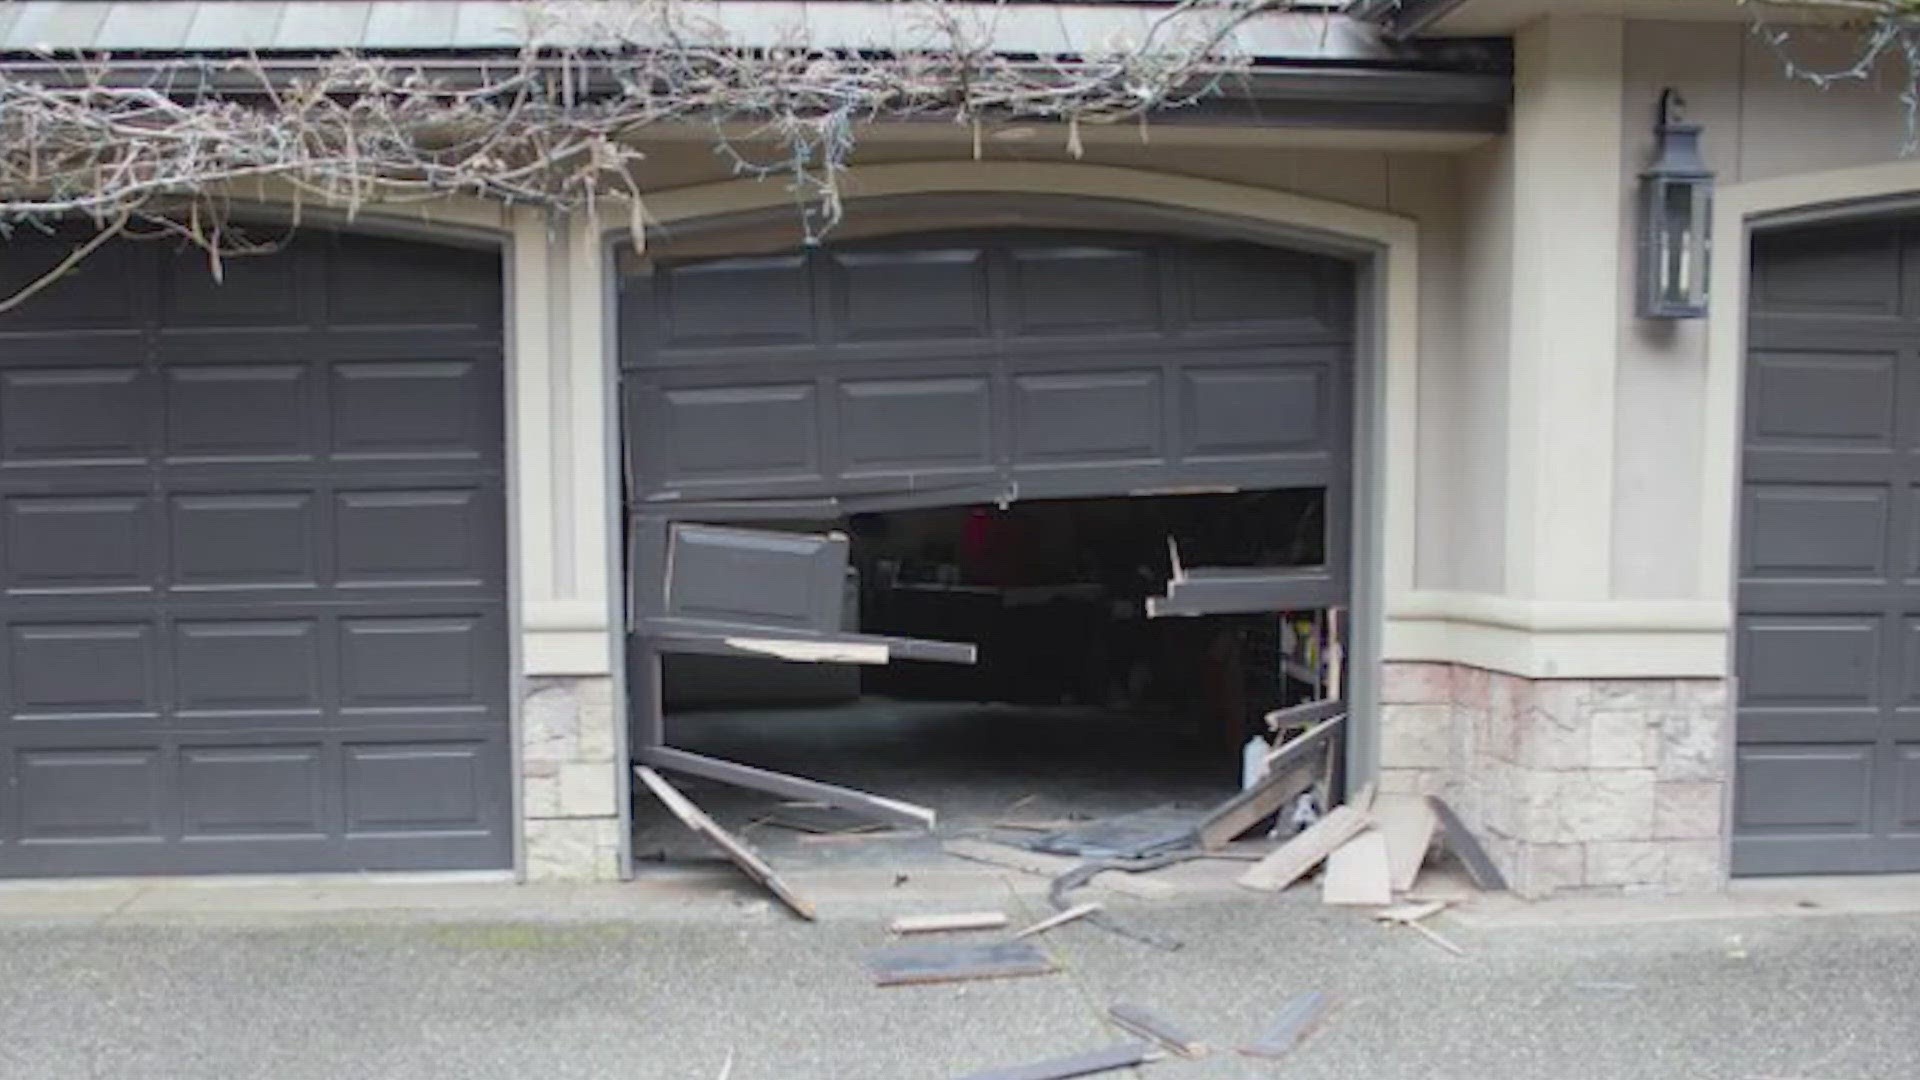 The 44-year-old man allegedly stole a vehicle from a Bellevue garage and carjacked another vehicle in Woodinville.